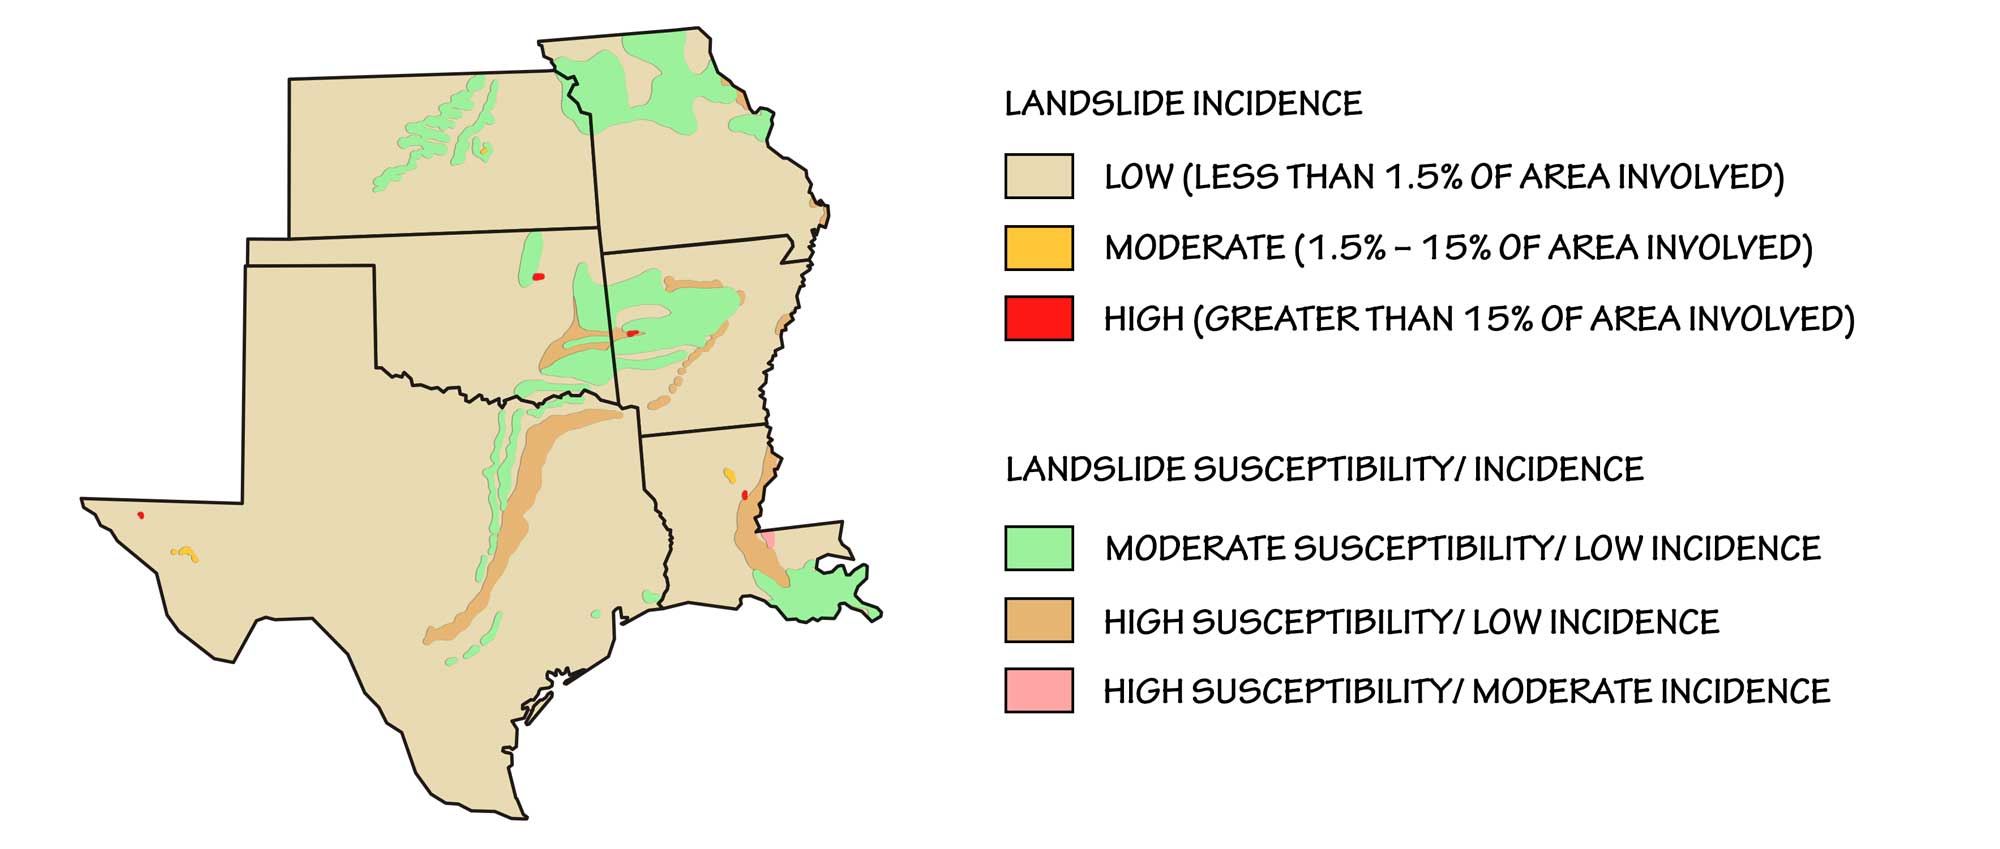 Map of the South Central United States showing areas of greatest risk of landslides.